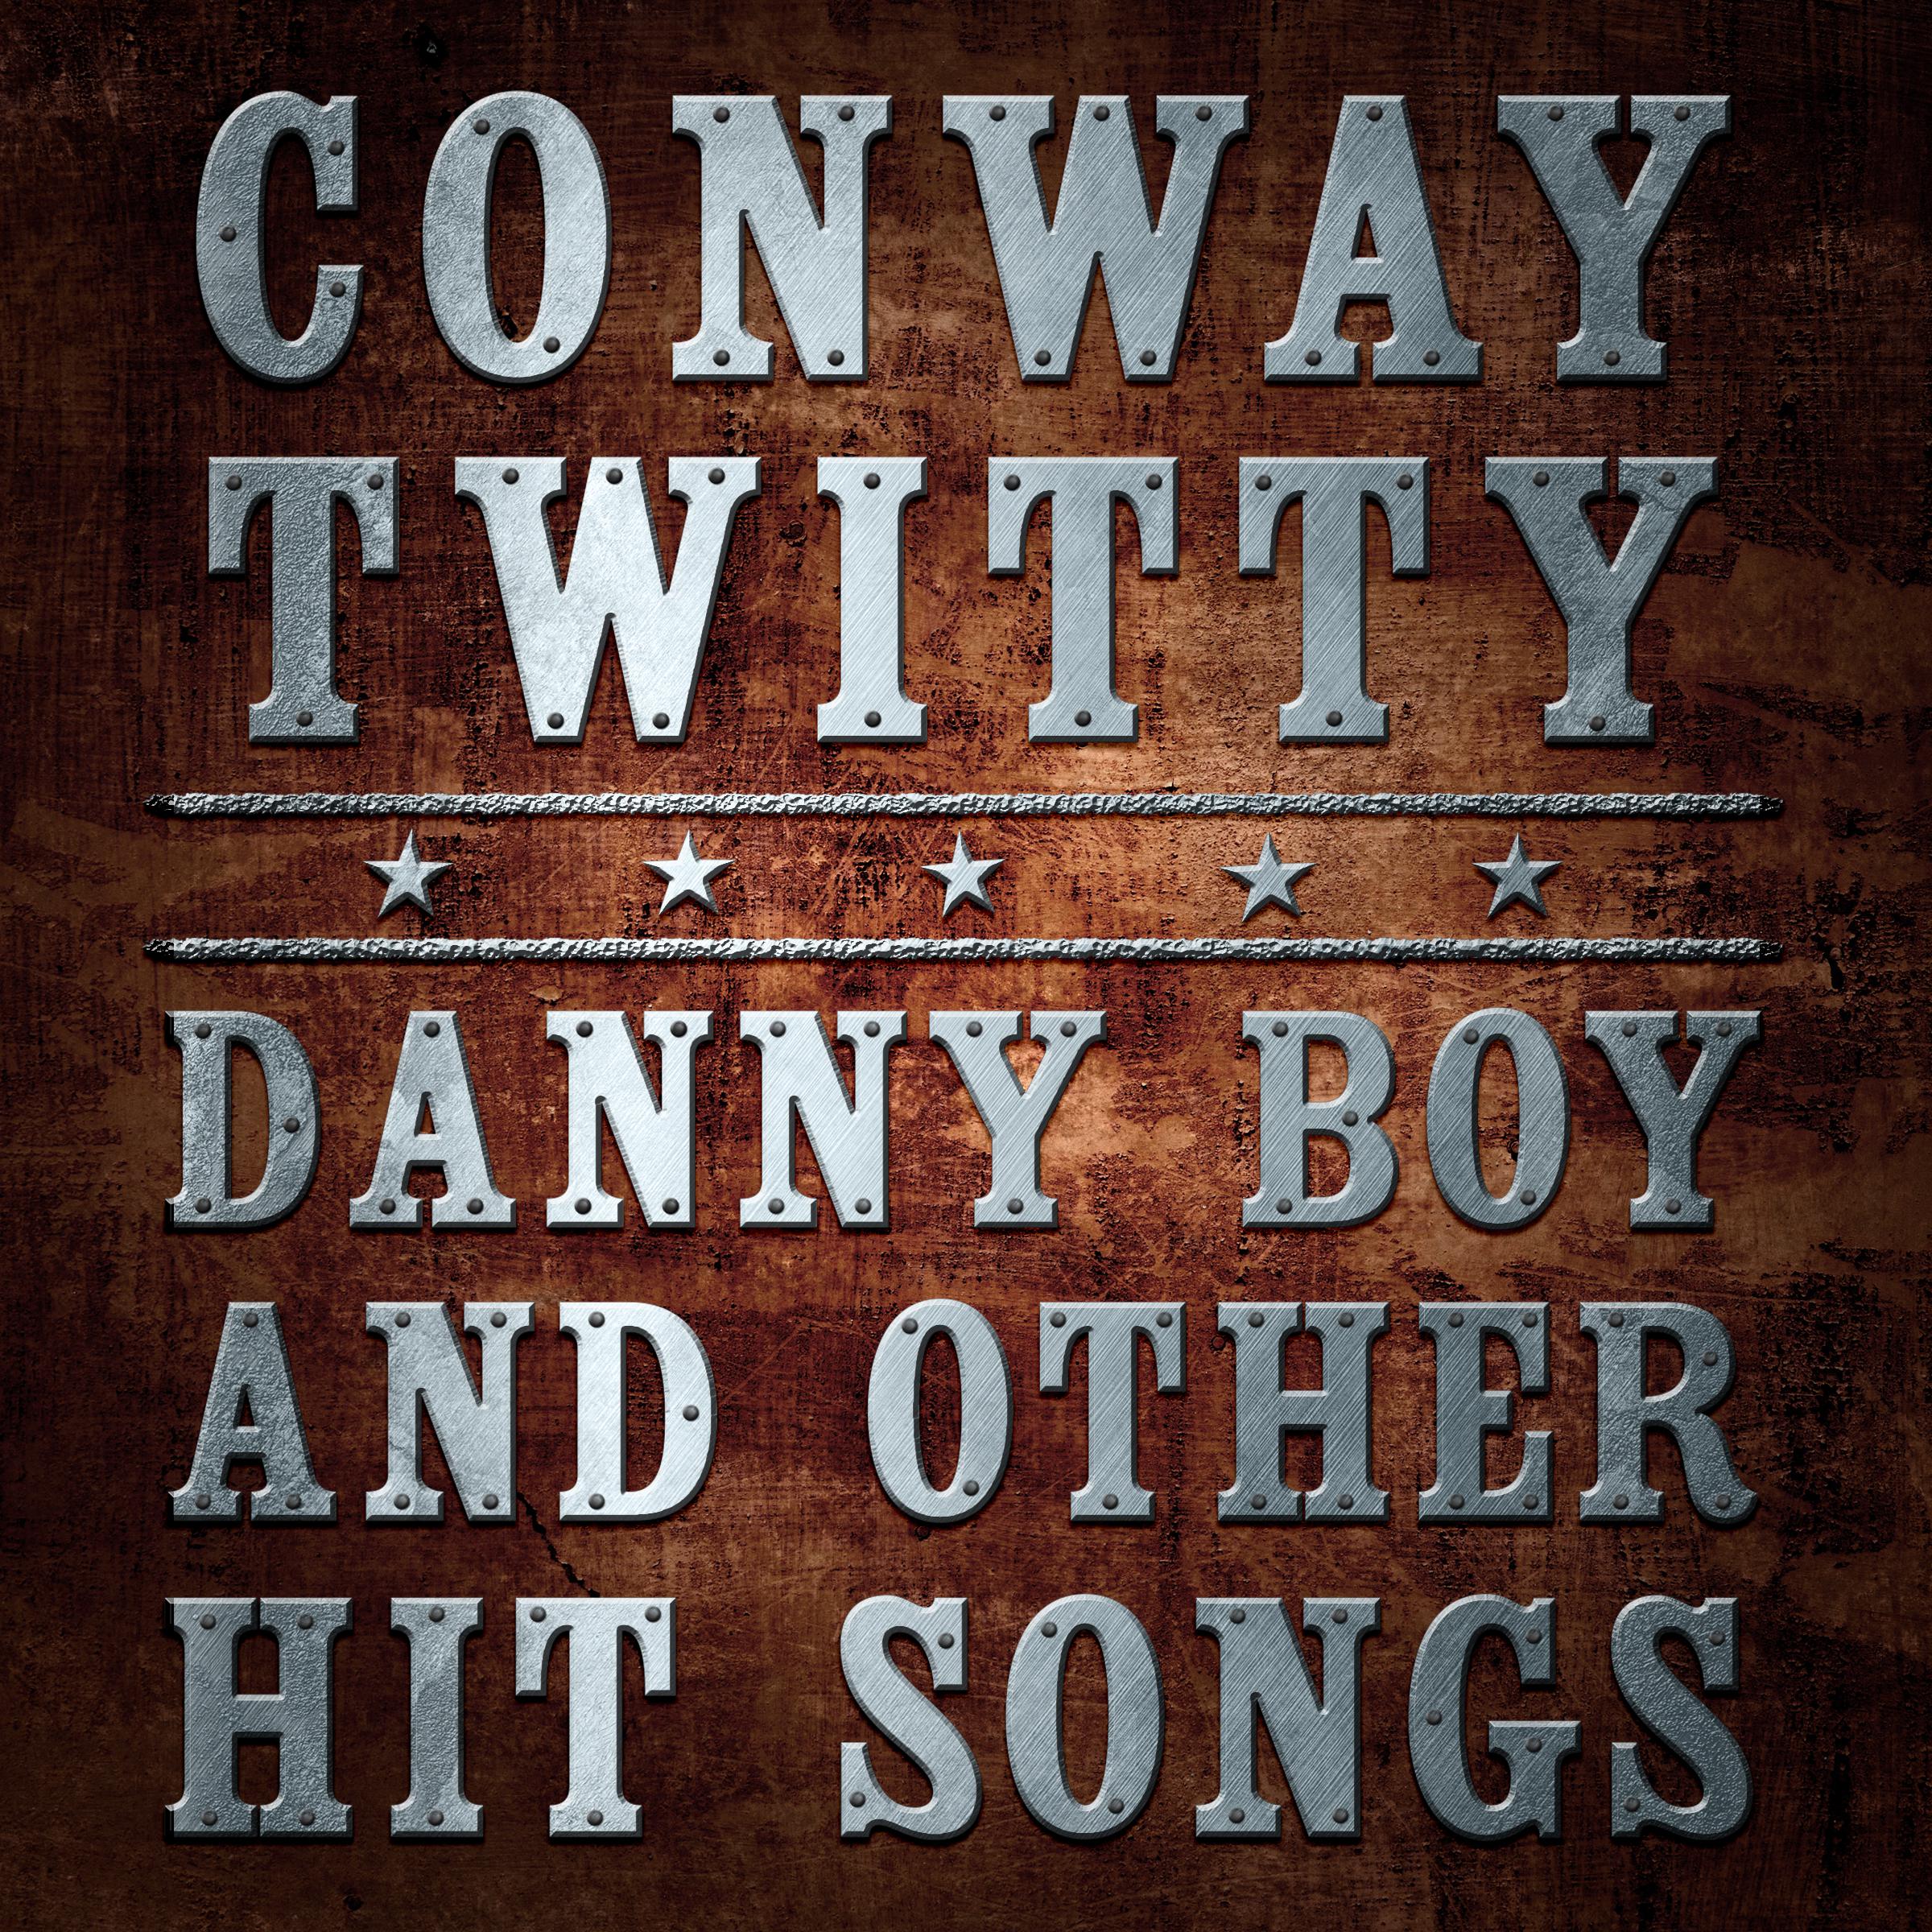 Danny Boy and other Hit Songs